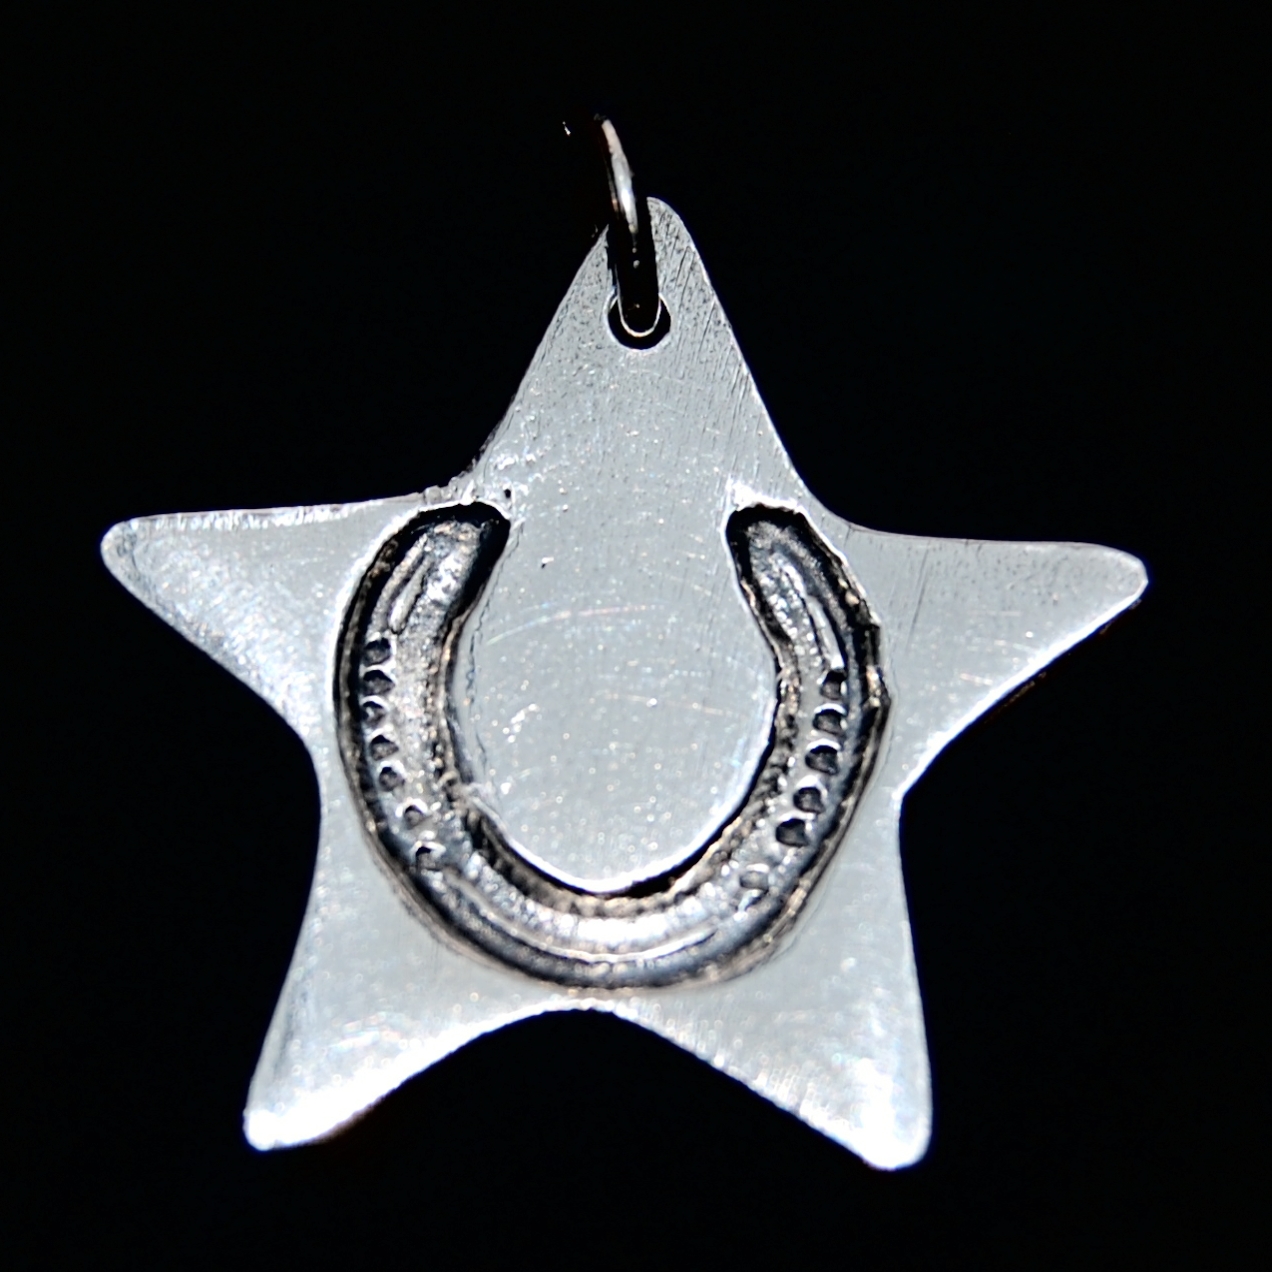 Regular silver star charm with your horse's unique shoe imprint.